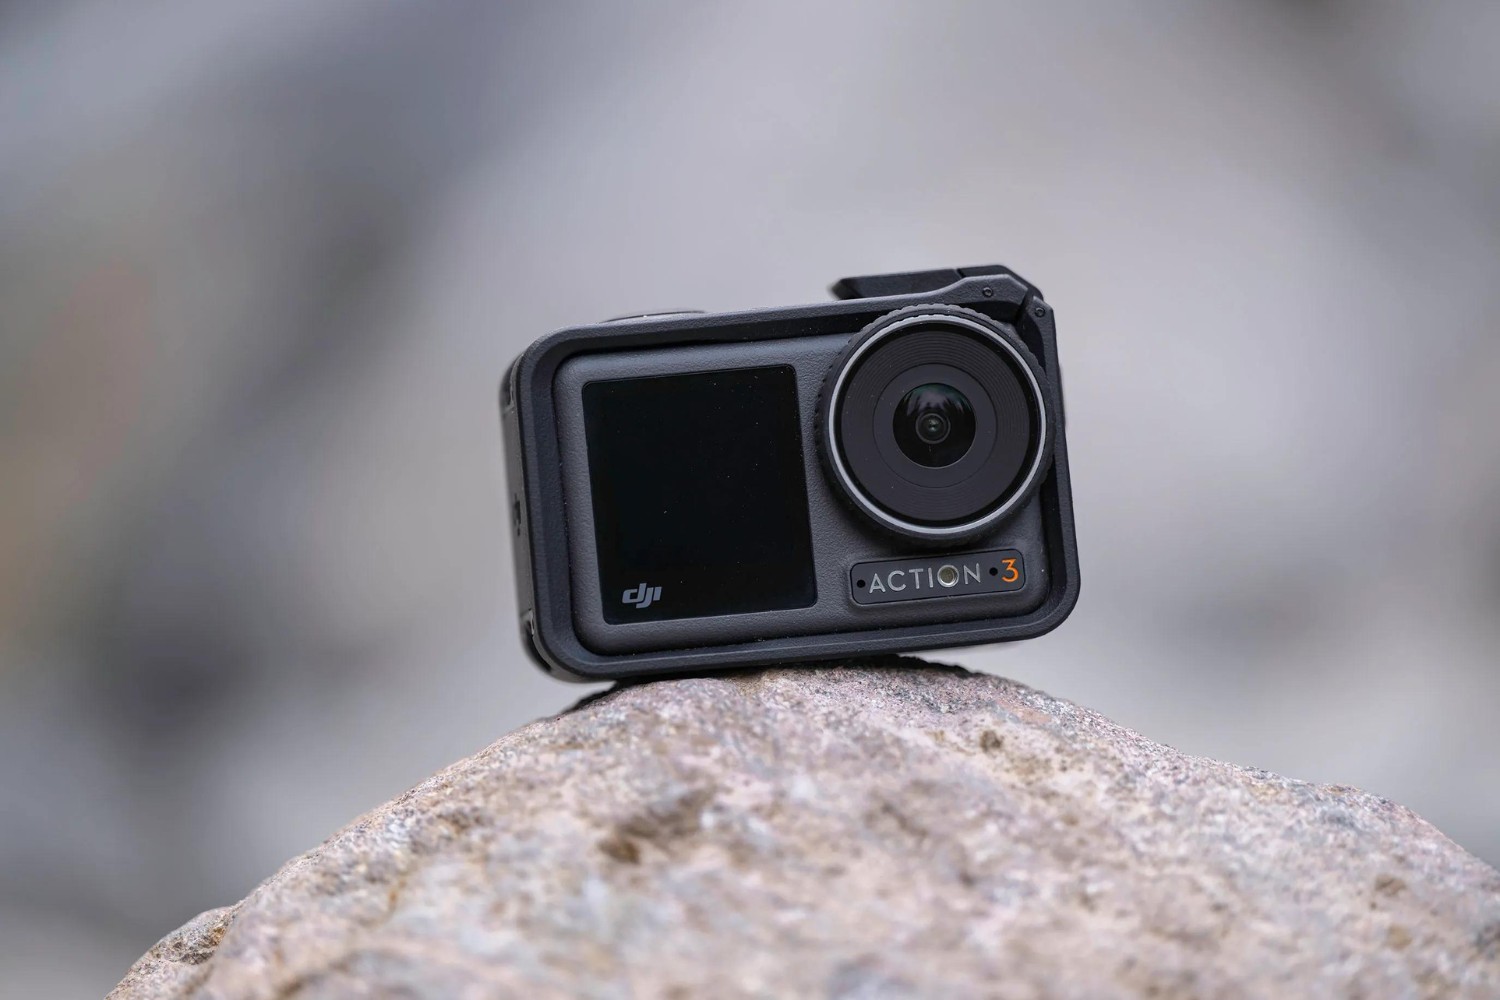 What Does EV Stand For On An Action Camera